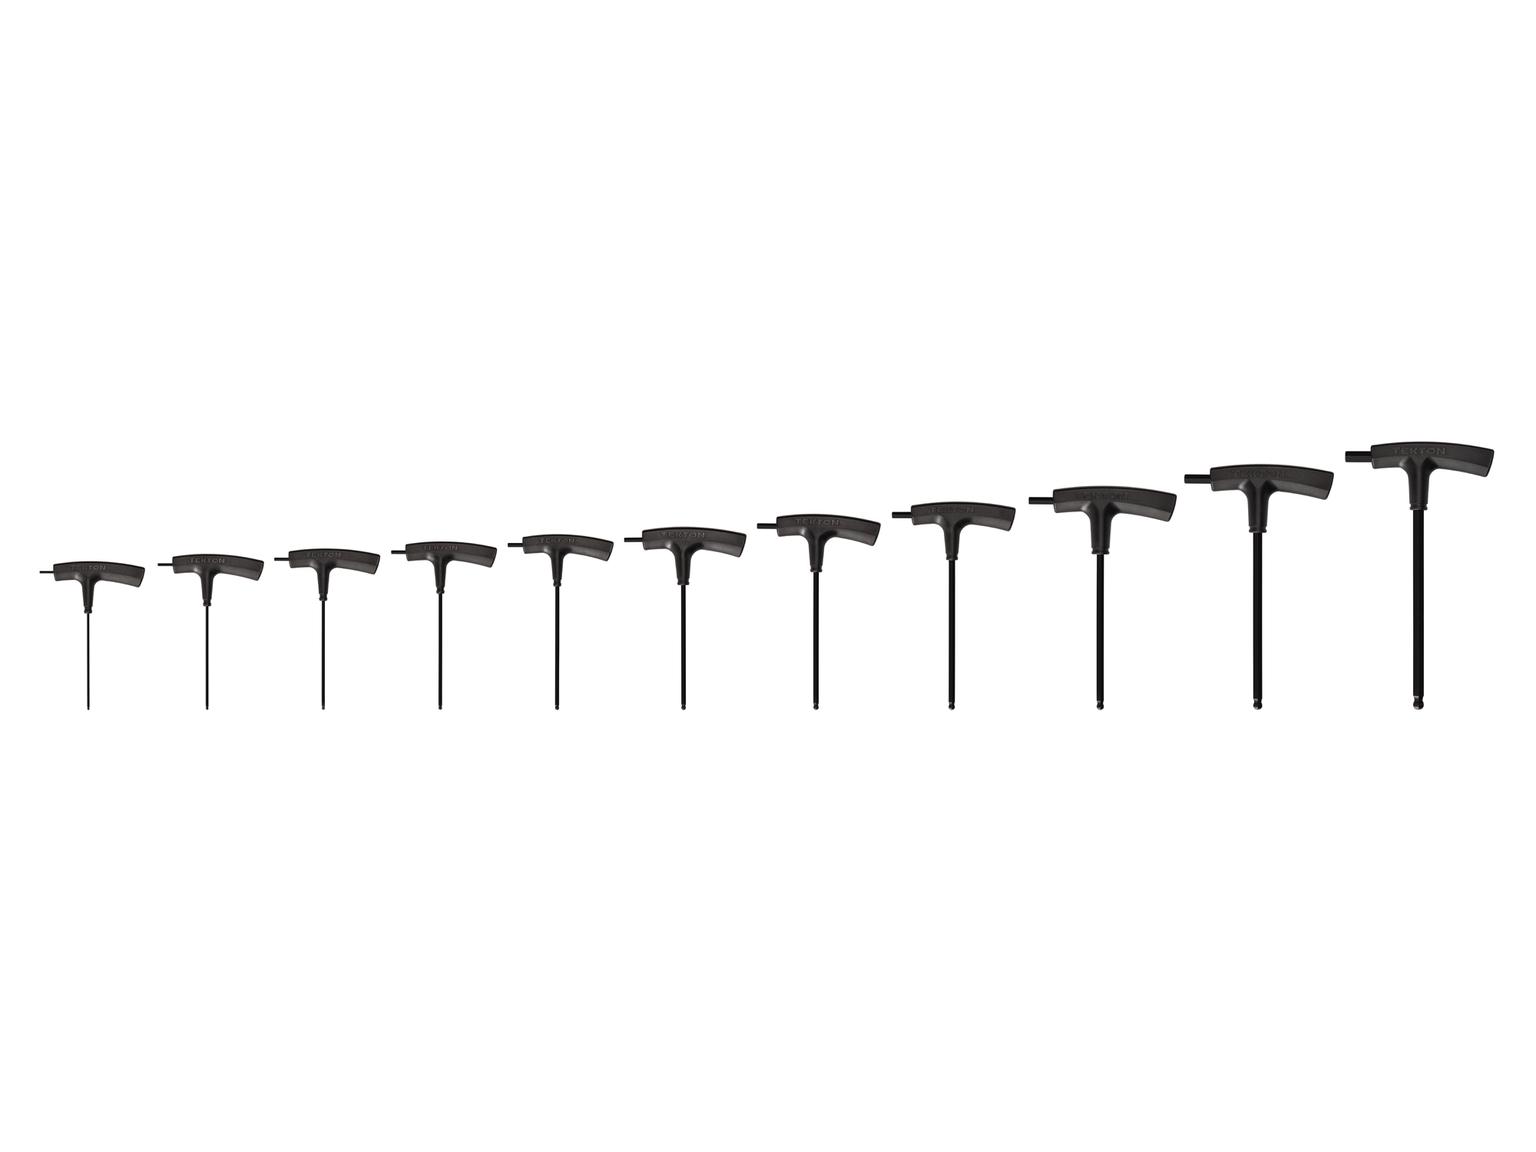 TEKTON KTX90101-T Ball End Hex T-Handle Key Set, 11-Piece (5/64-3/8 in.)